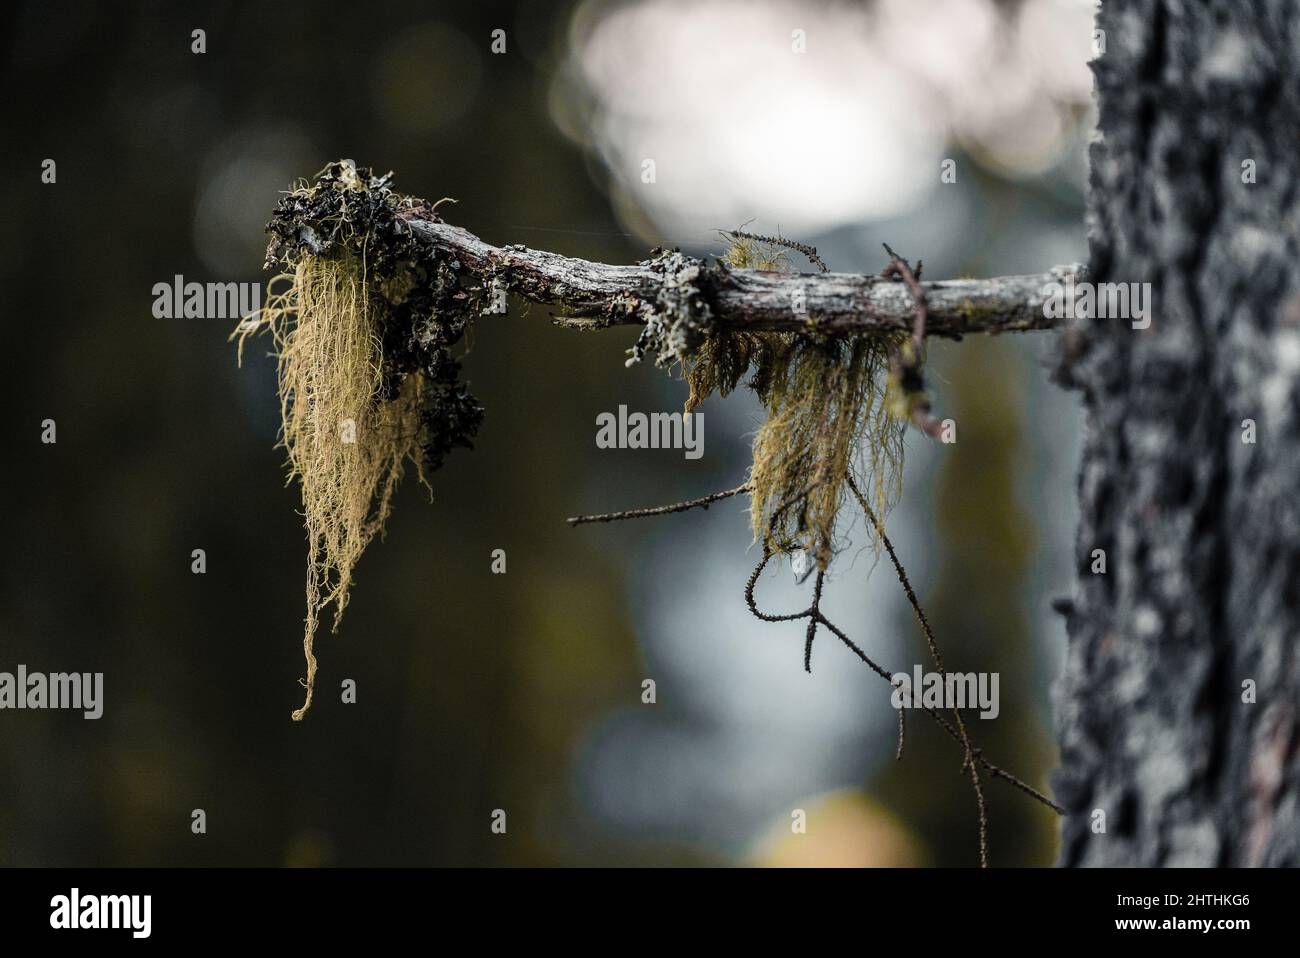 Close-up shot of a twig overgrown with beard lichens Stock Photo